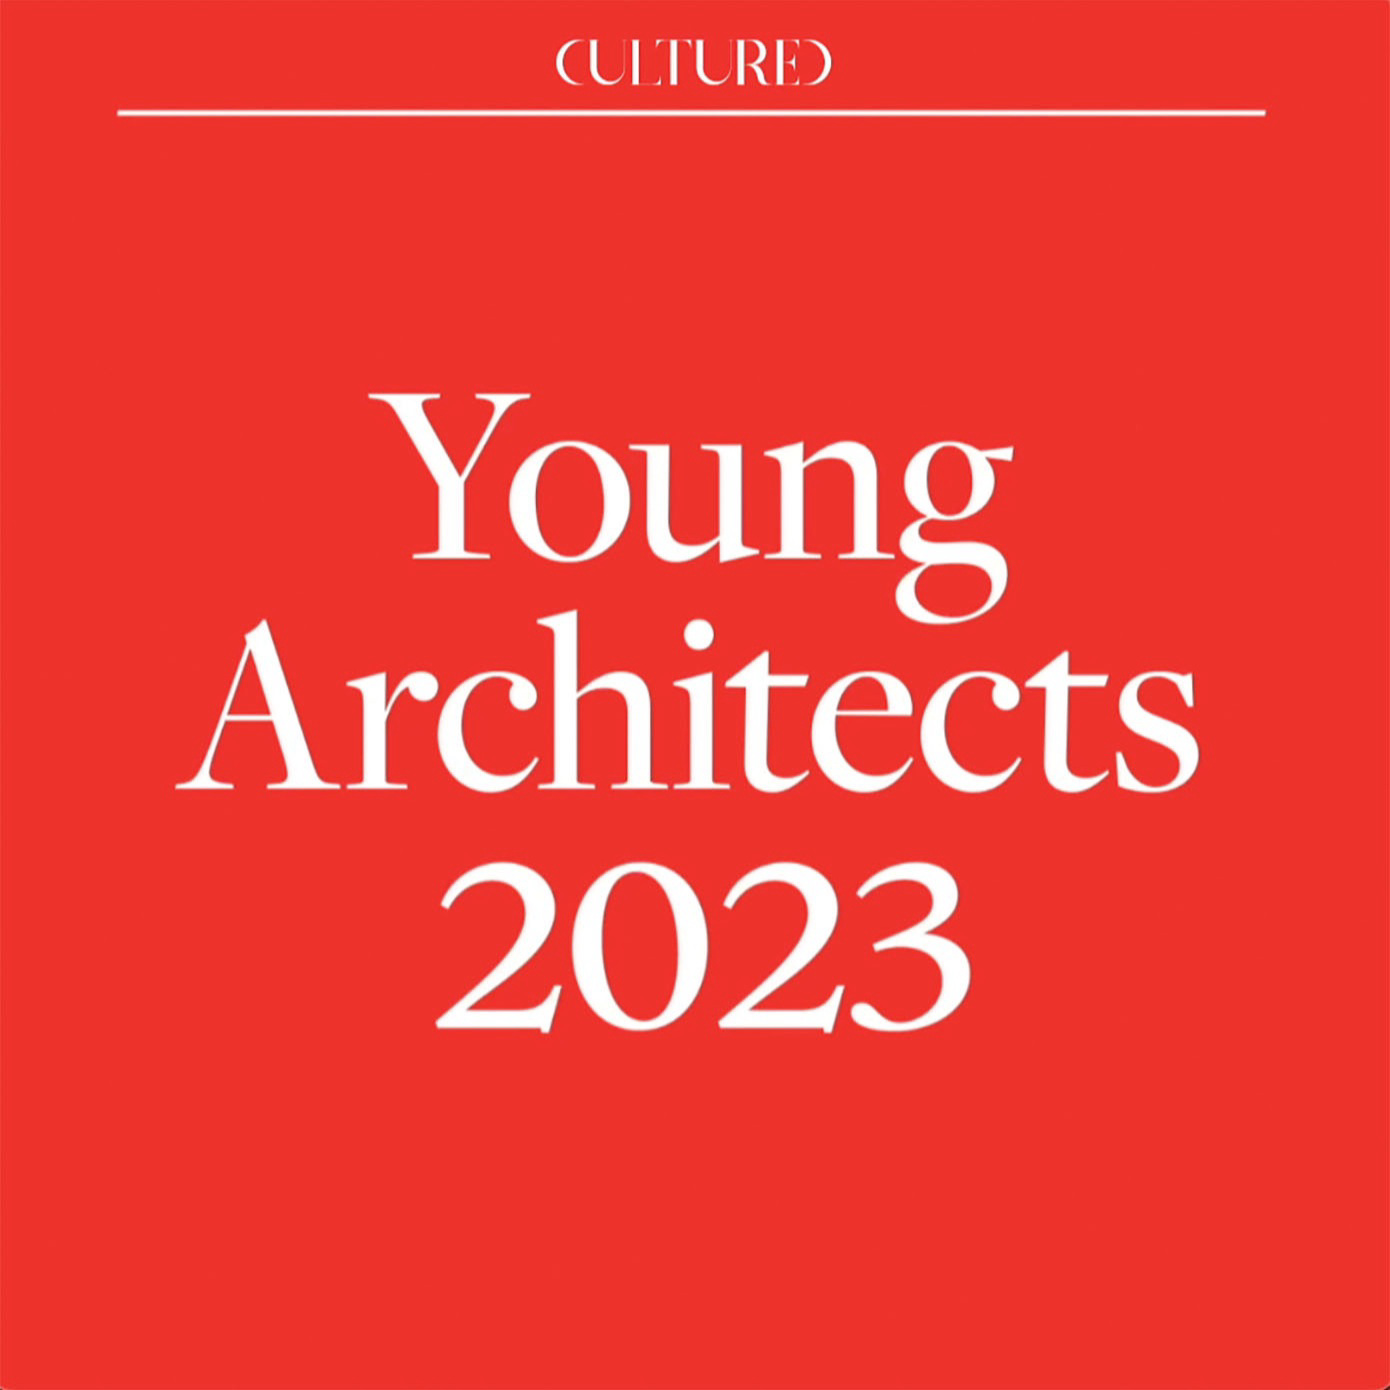 cultured-young-architects-2023